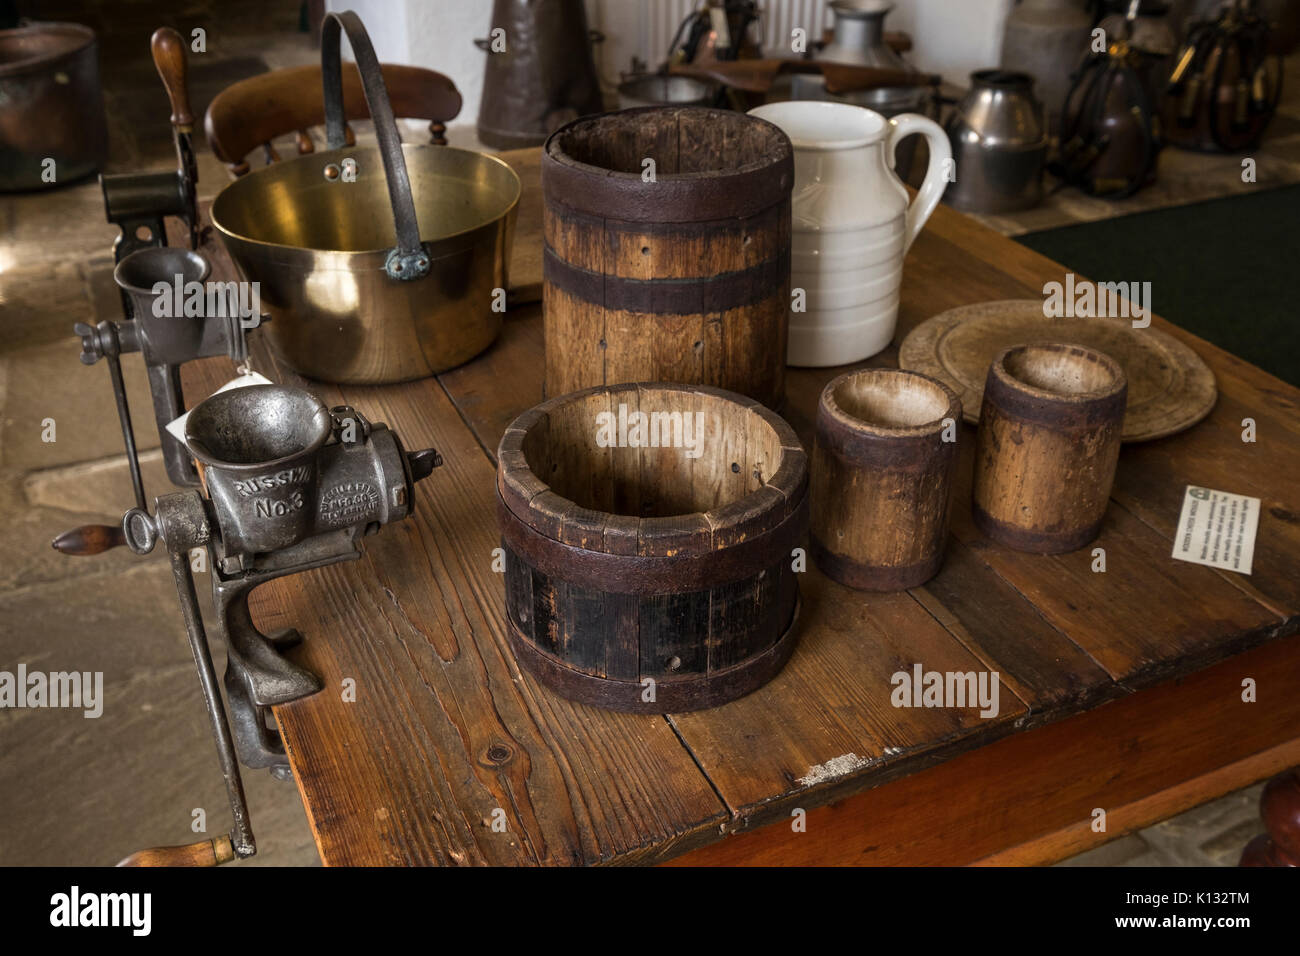 Vintage wooden cheese moulds, meat mincers, and kitchen implements on a wood table in the Hawes Creamery museum, Hawes, Yorkshire, England, UK Stock Photo